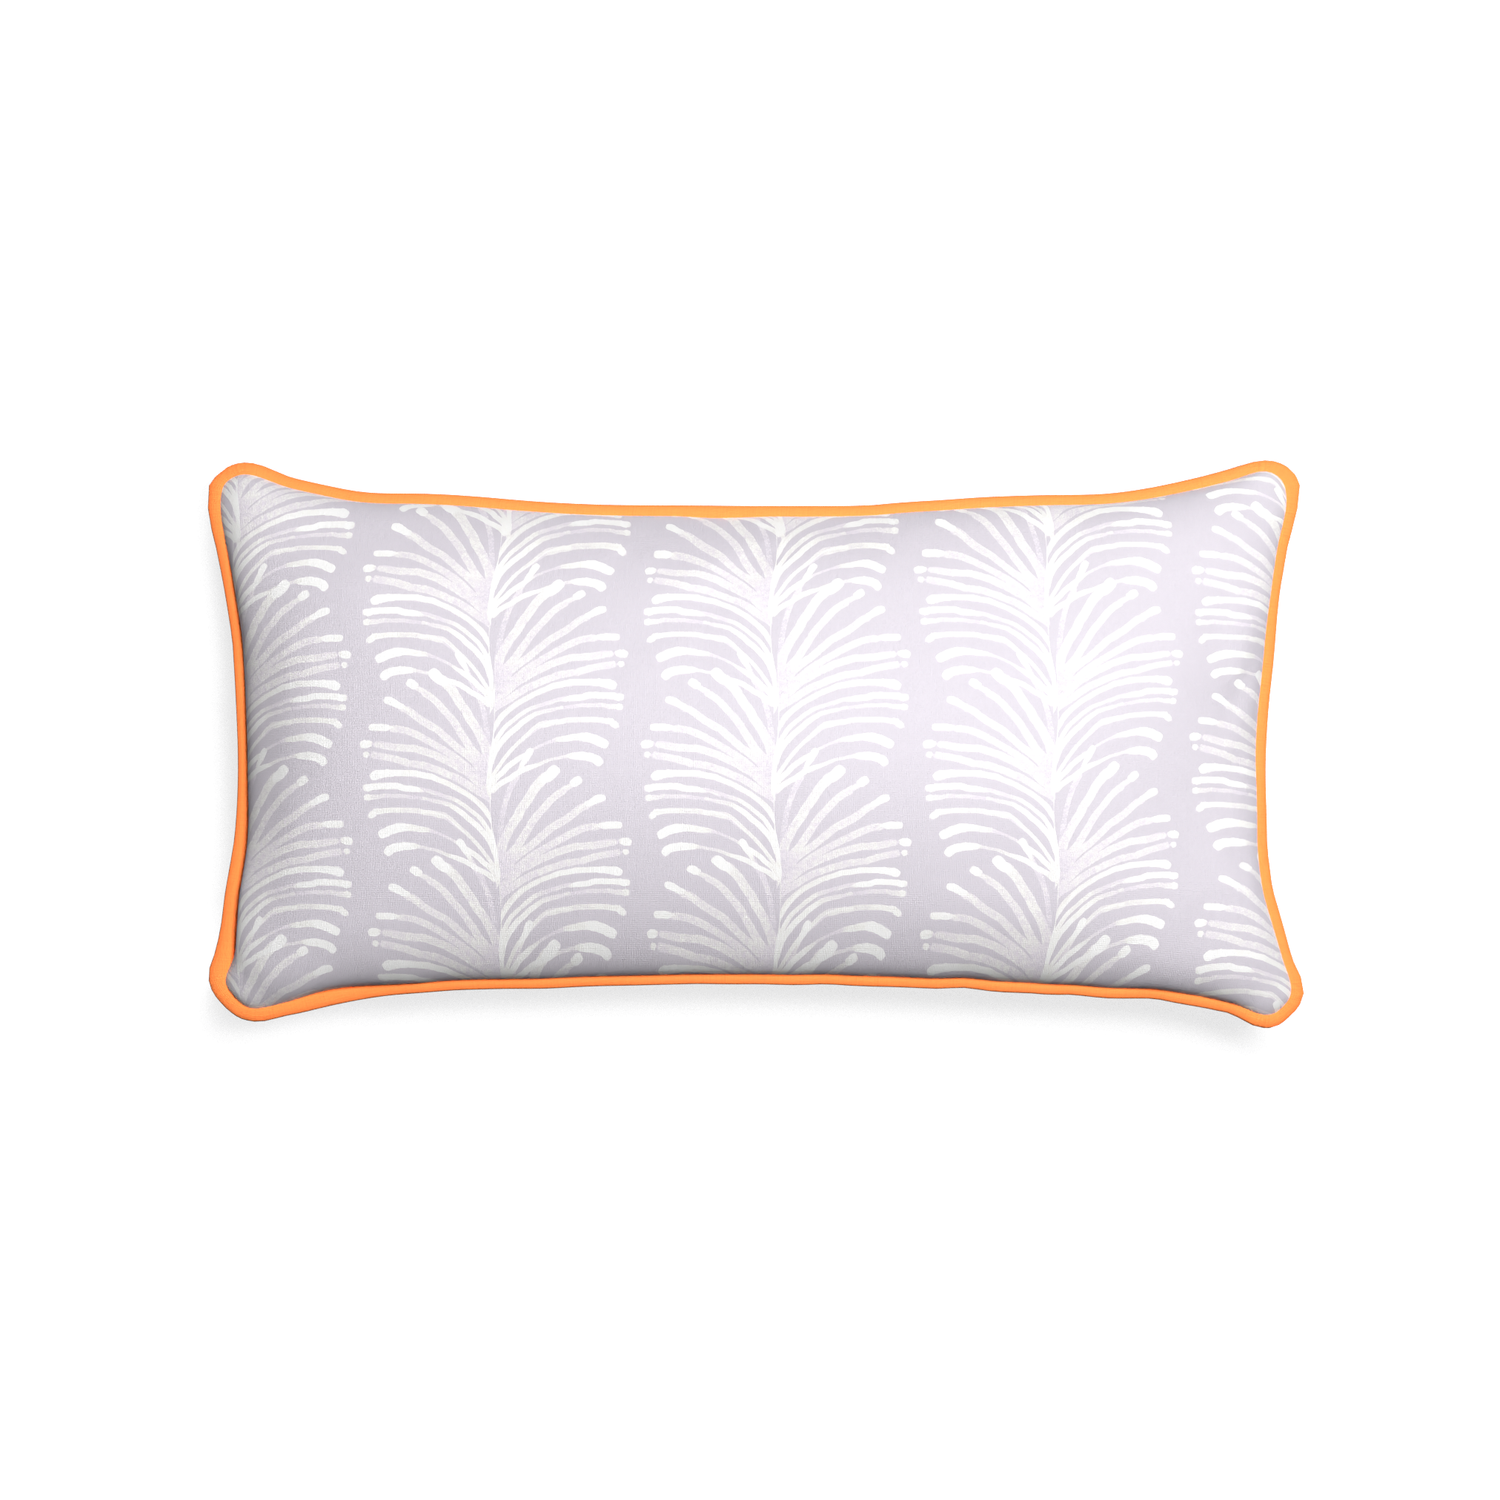 Midi-lumbar emma lavender custom lavender botanical stripepillow with clementine piping on white background